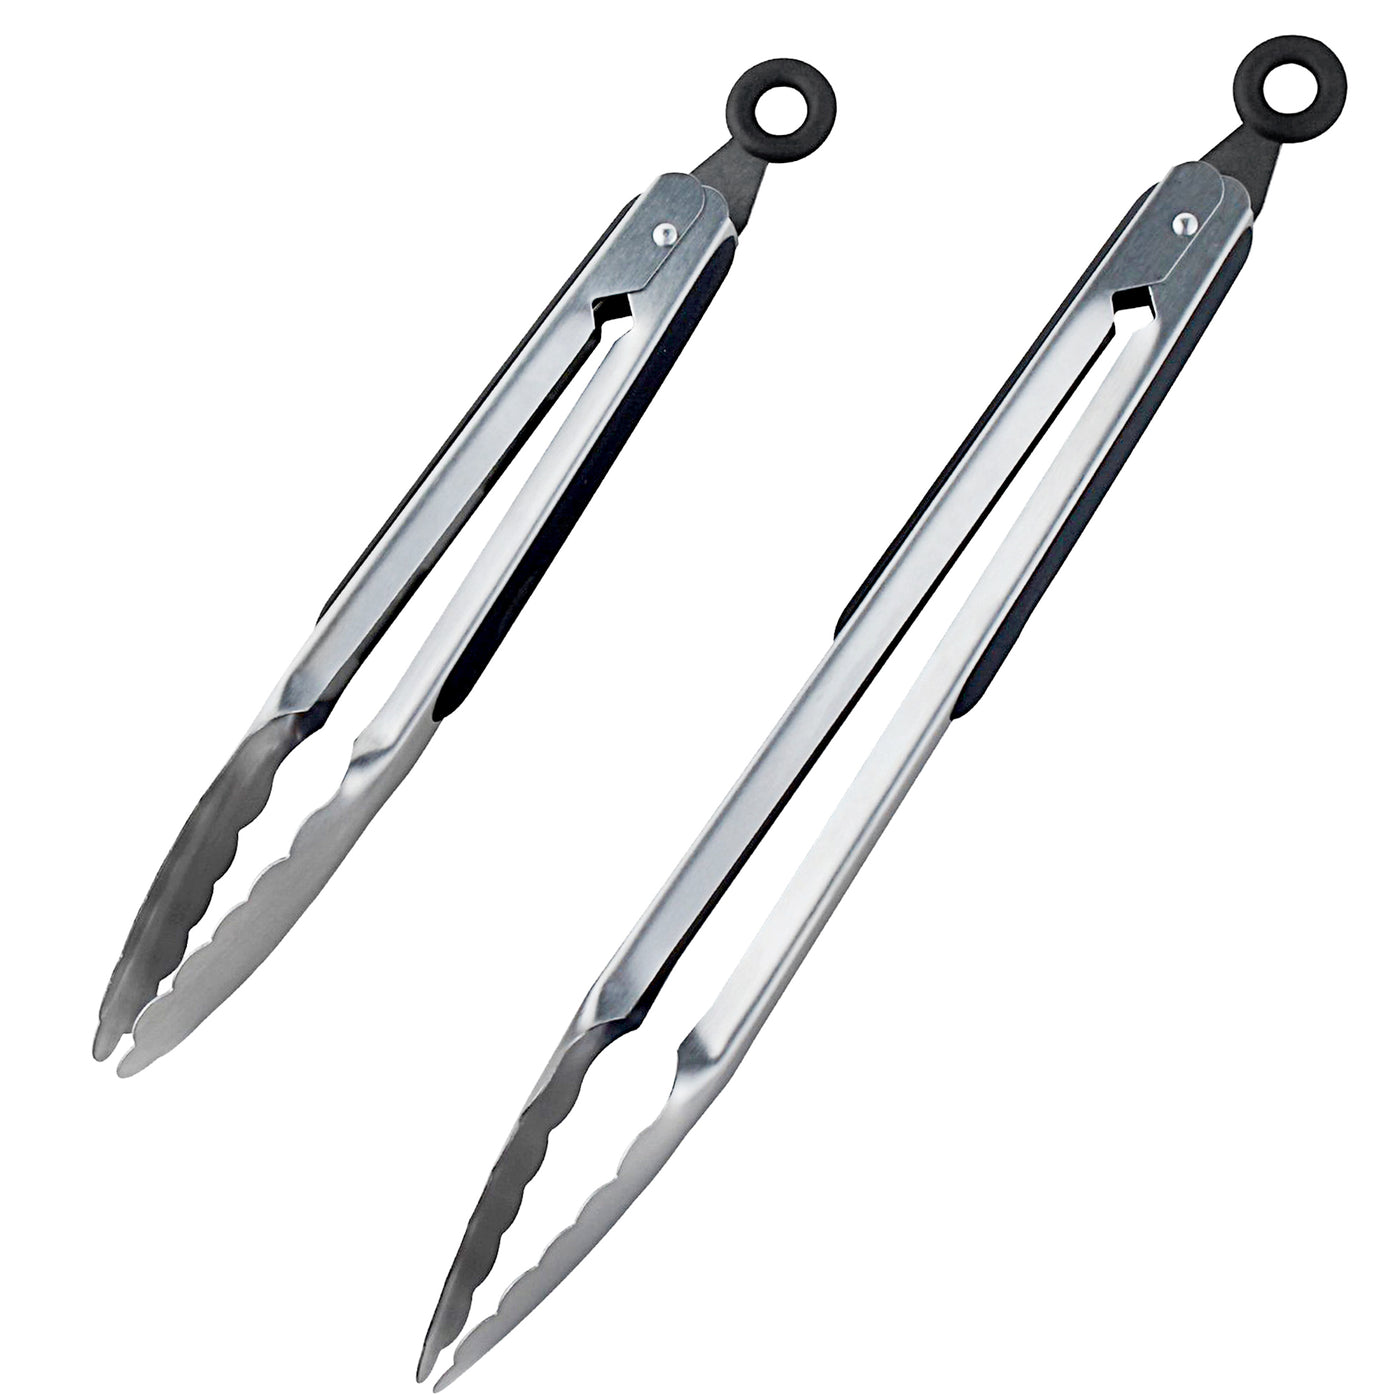 12" and 9" Stainless Steel Tongs